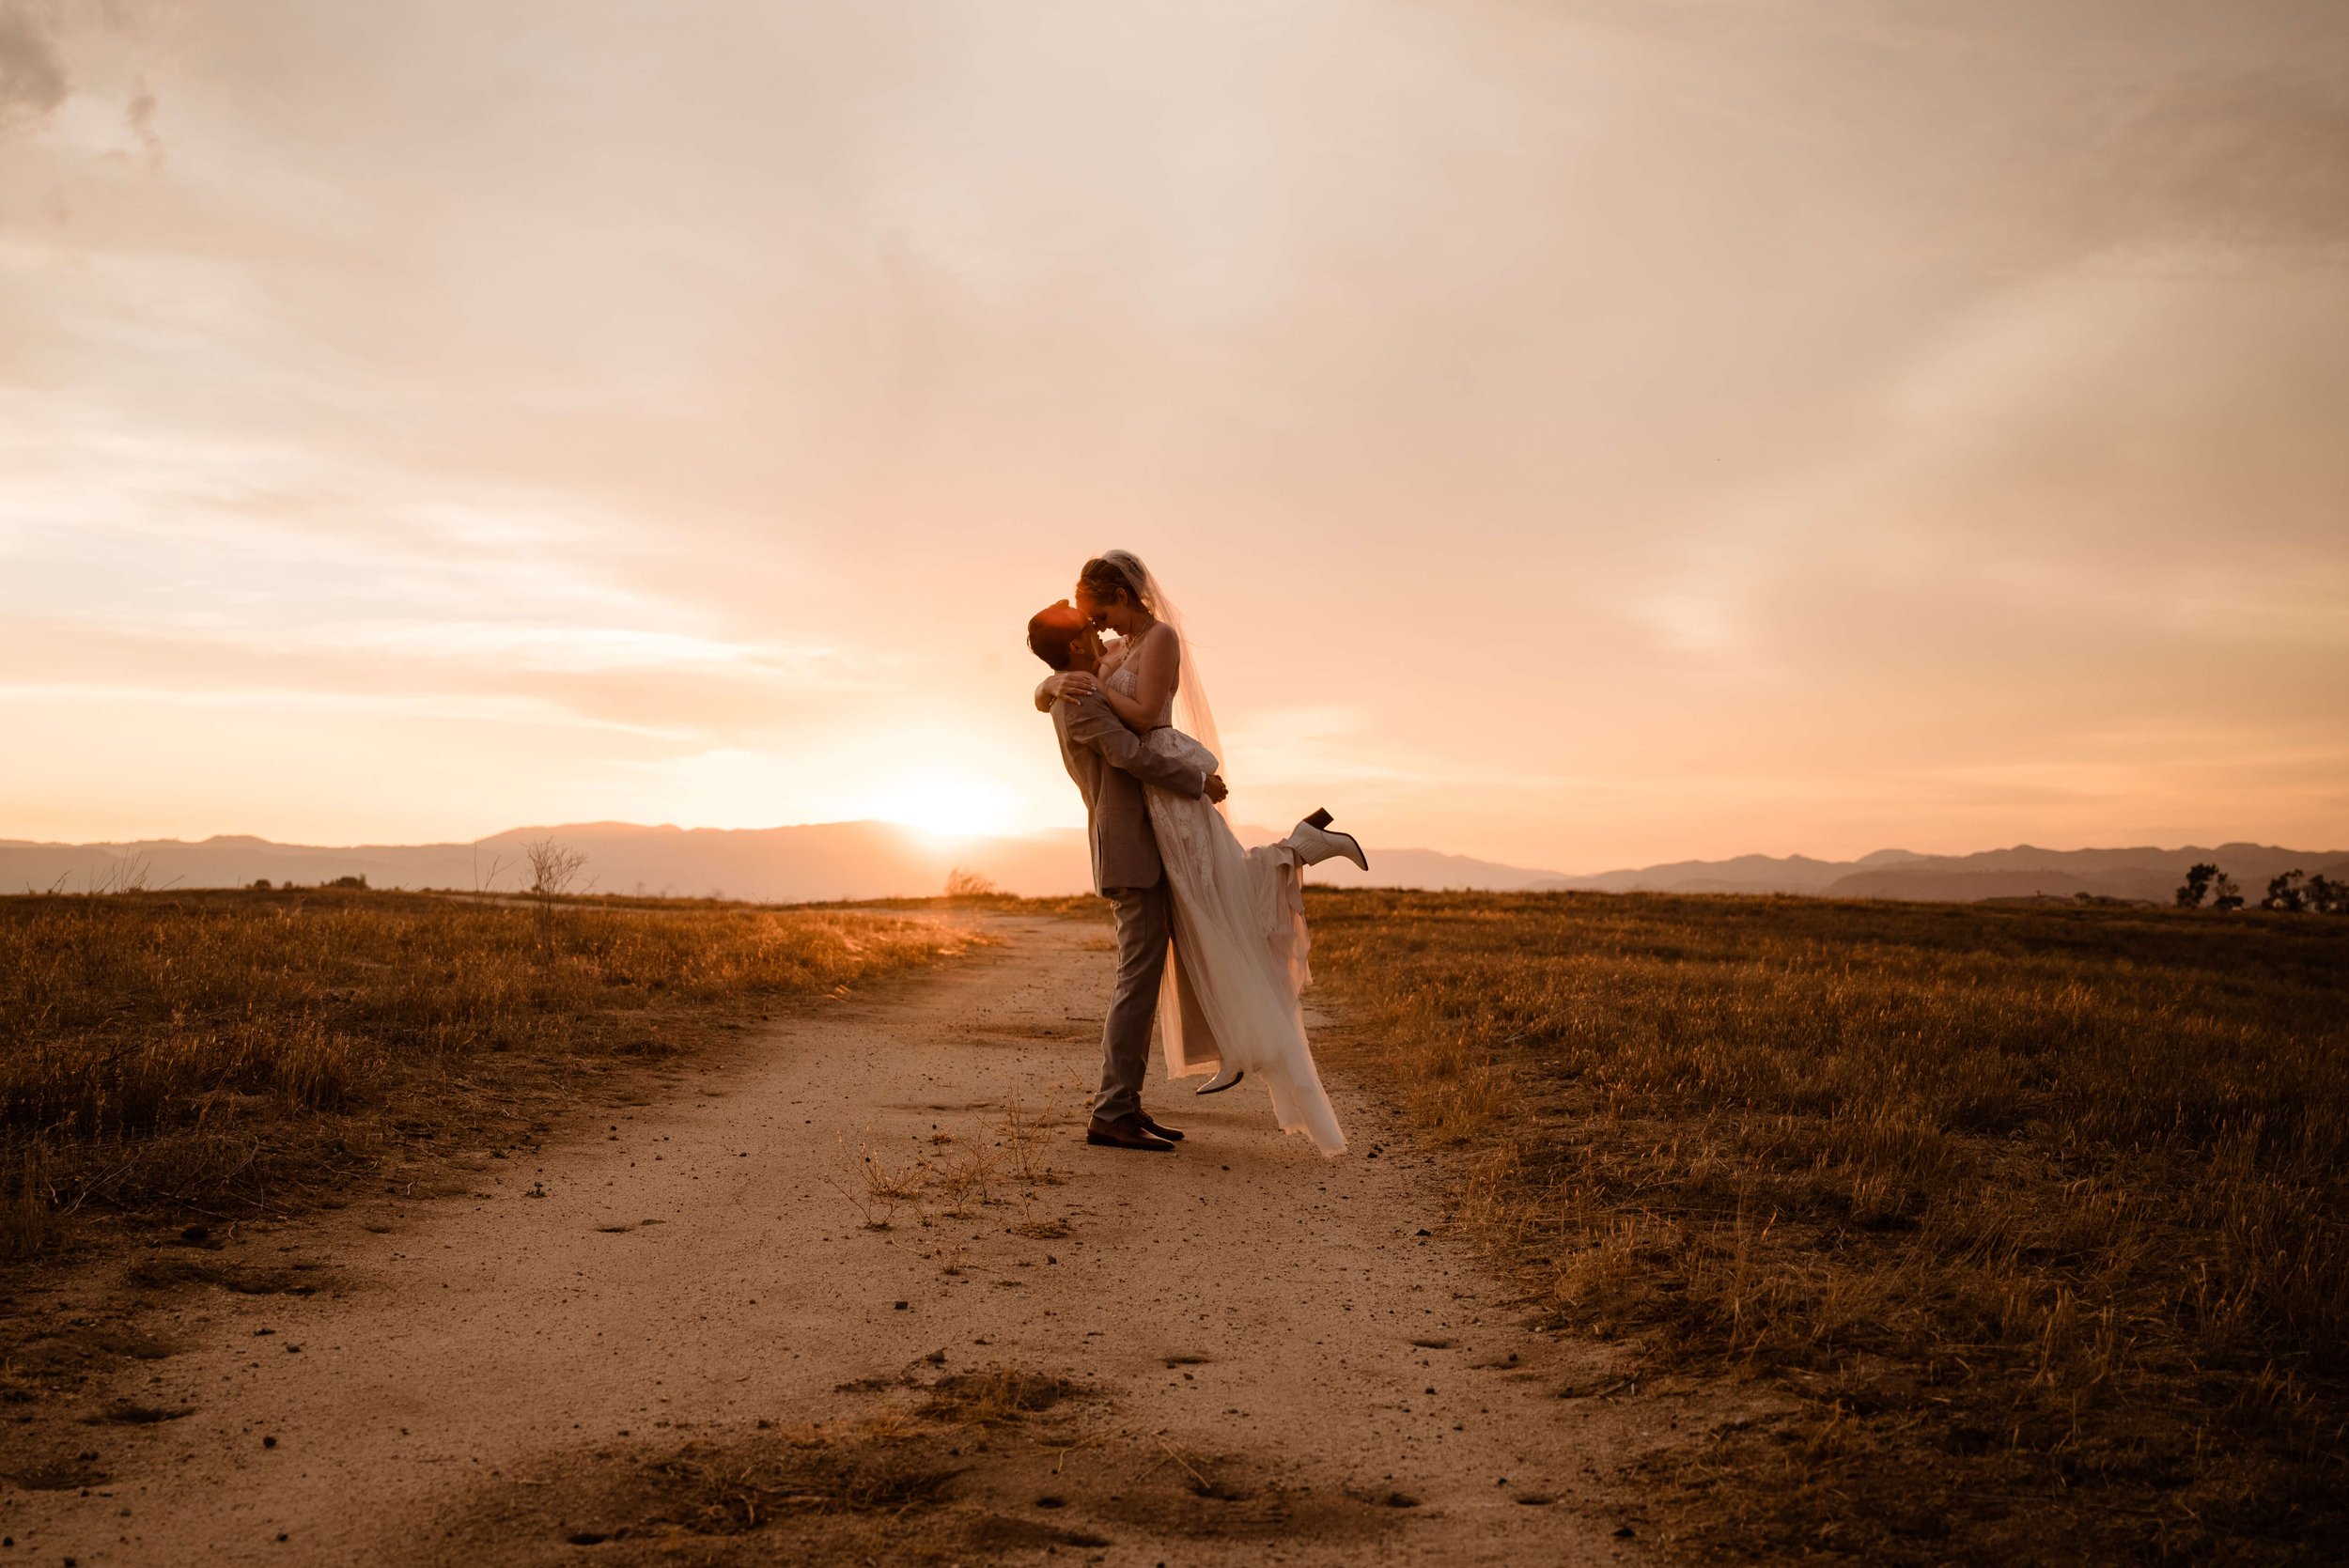 Sunset Desert Elopement photographed by J. Andrade Visual Arts